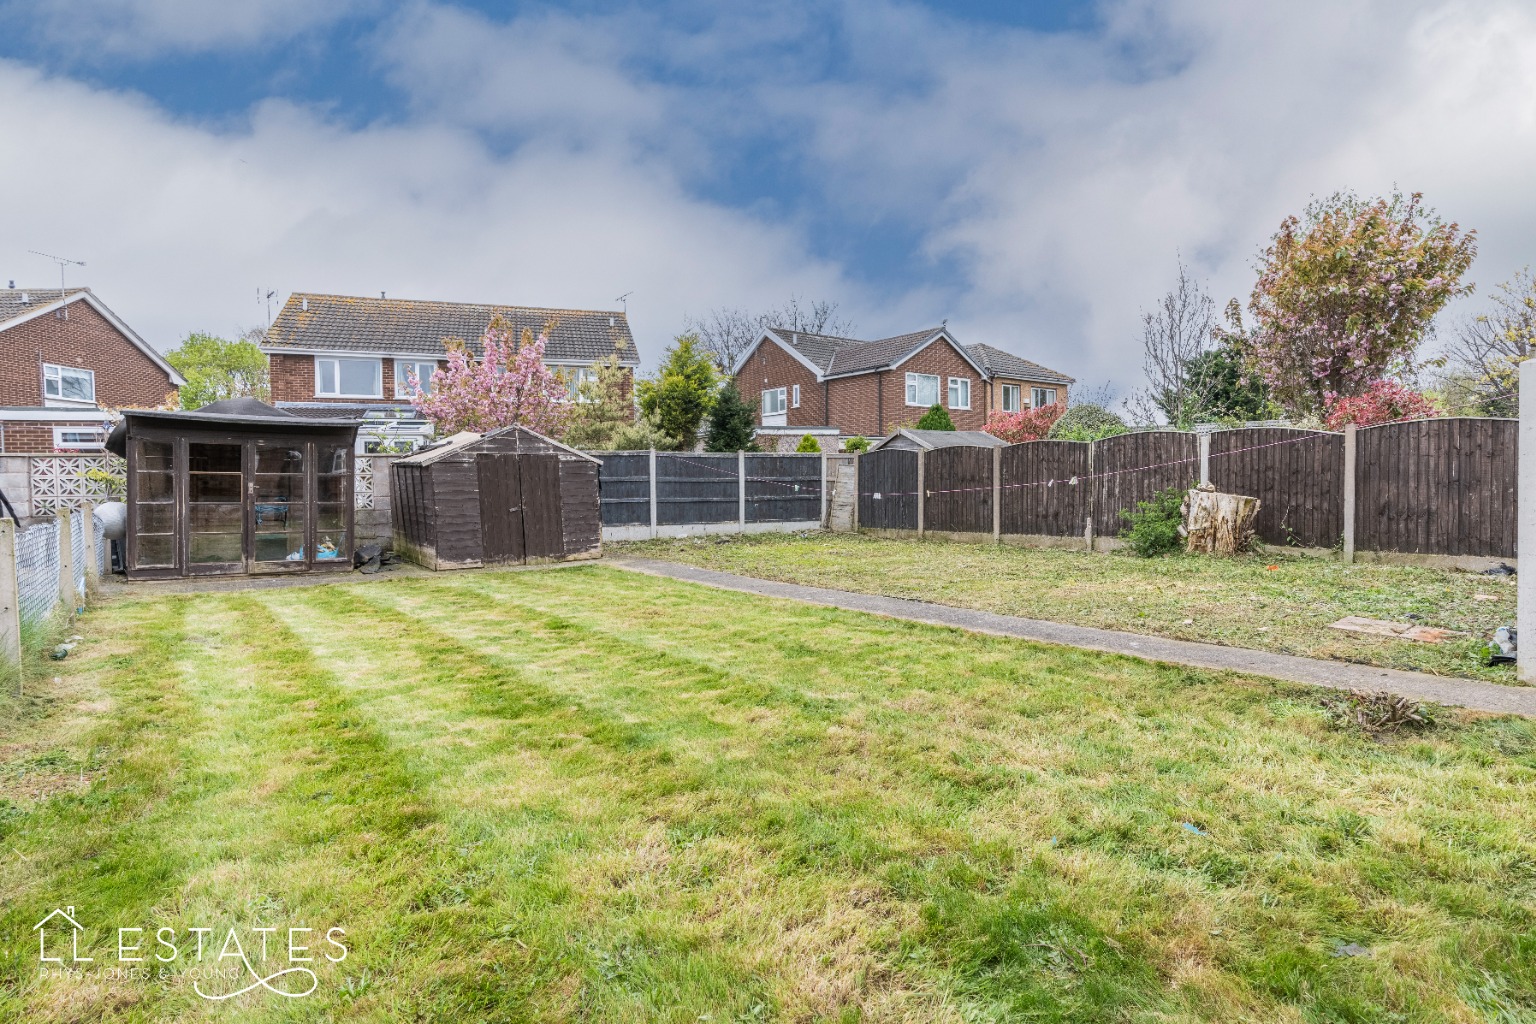 3 bed end of terrace house for sale in Ffordd-Y-Morfa, Abergele  - Property Image 2